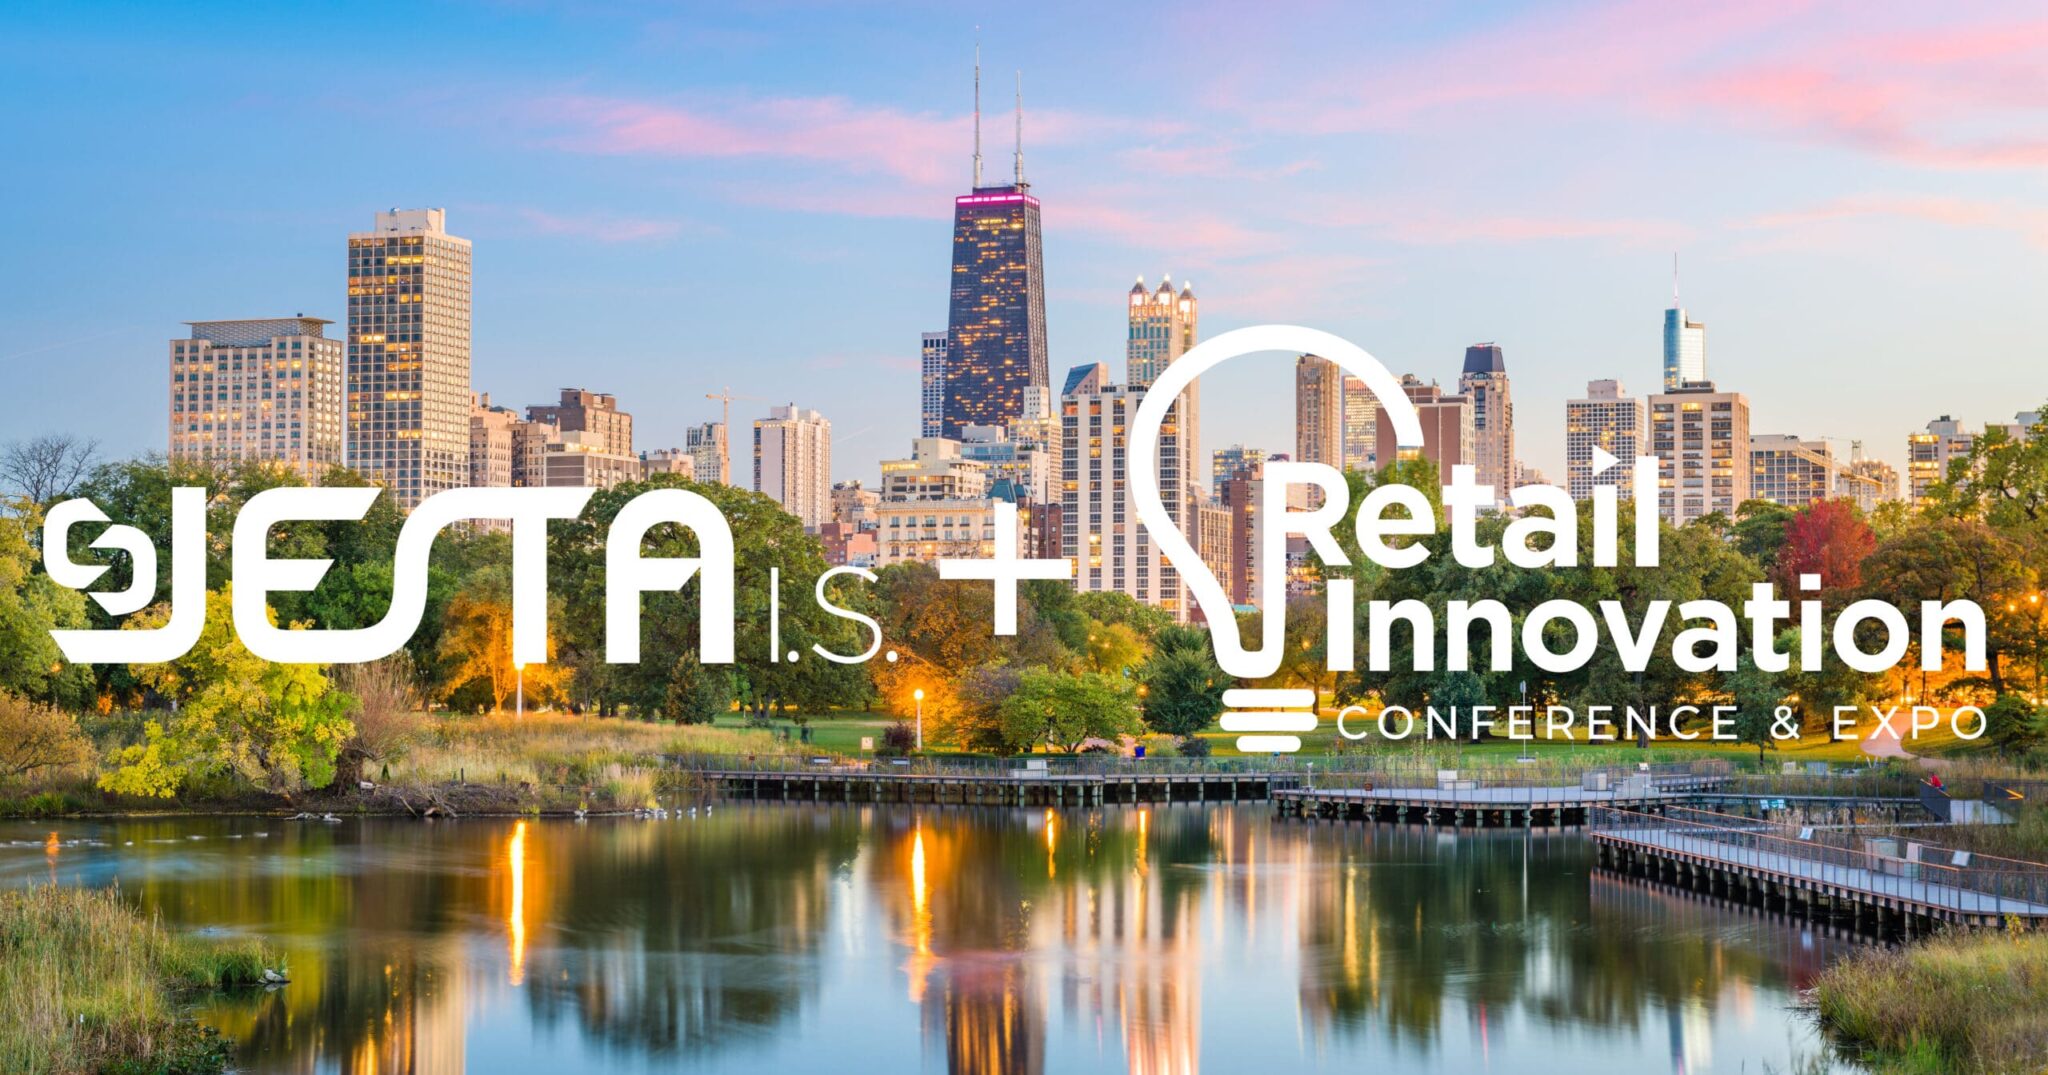 Jesta Joins the Retail Innovation Conference & Expo, May 11–12!